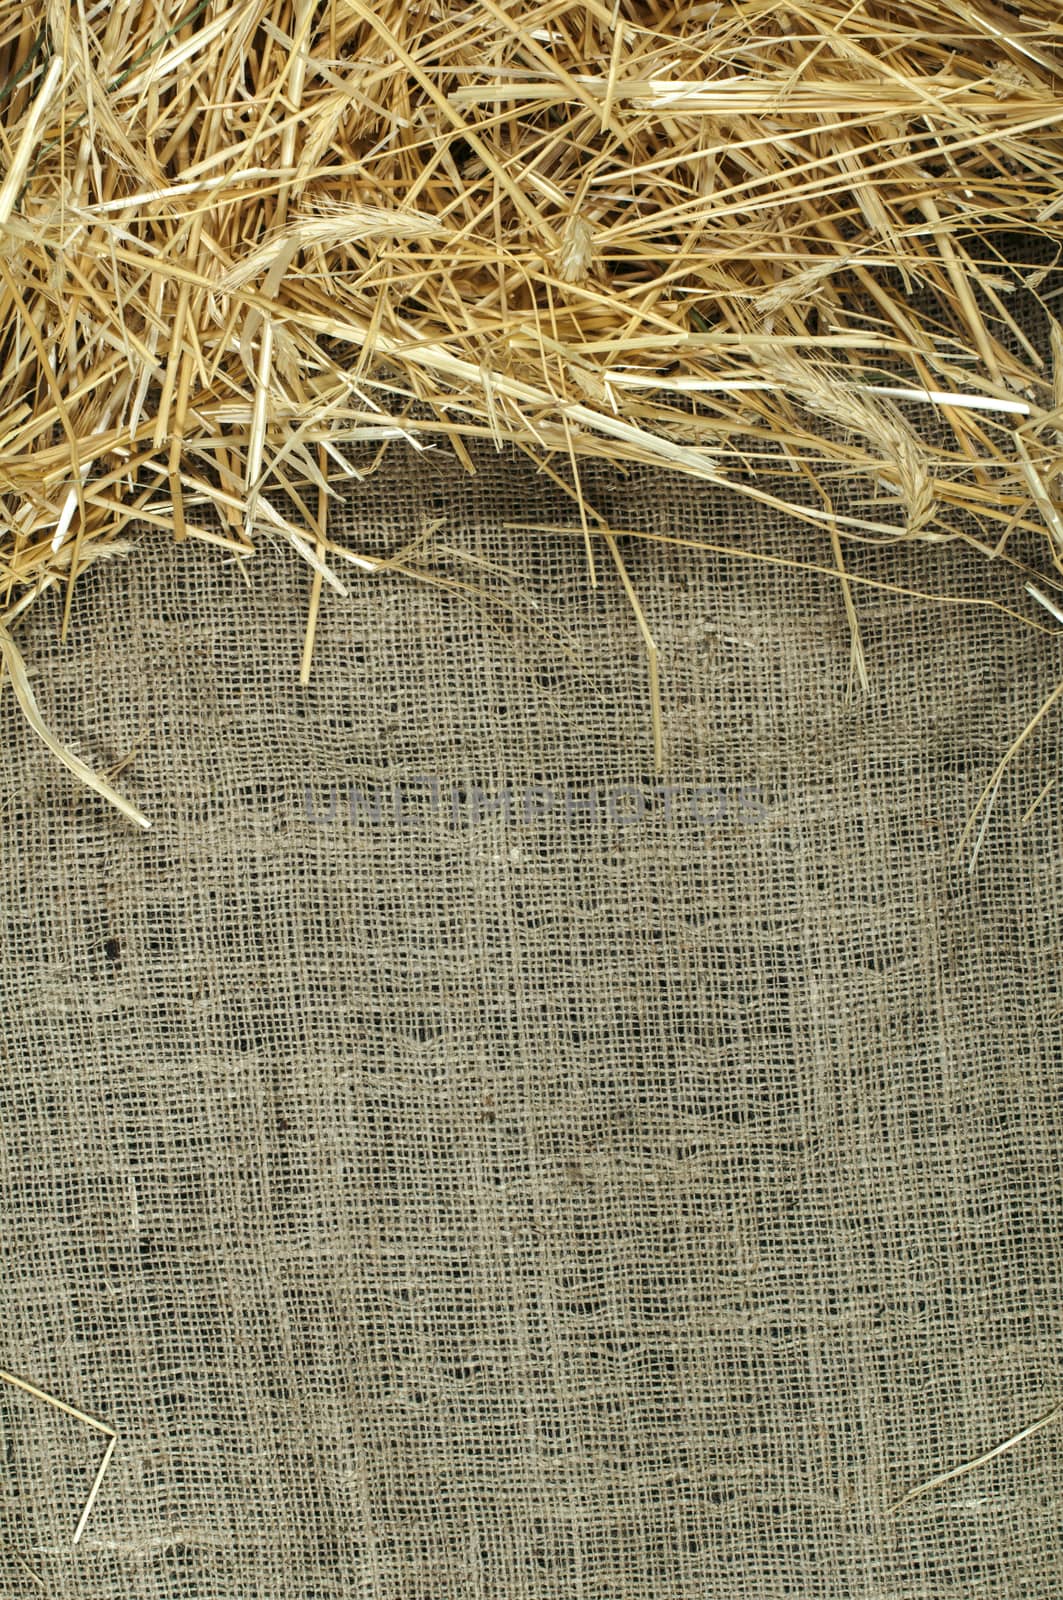 Straw on burlap and copy space. Studio shot.